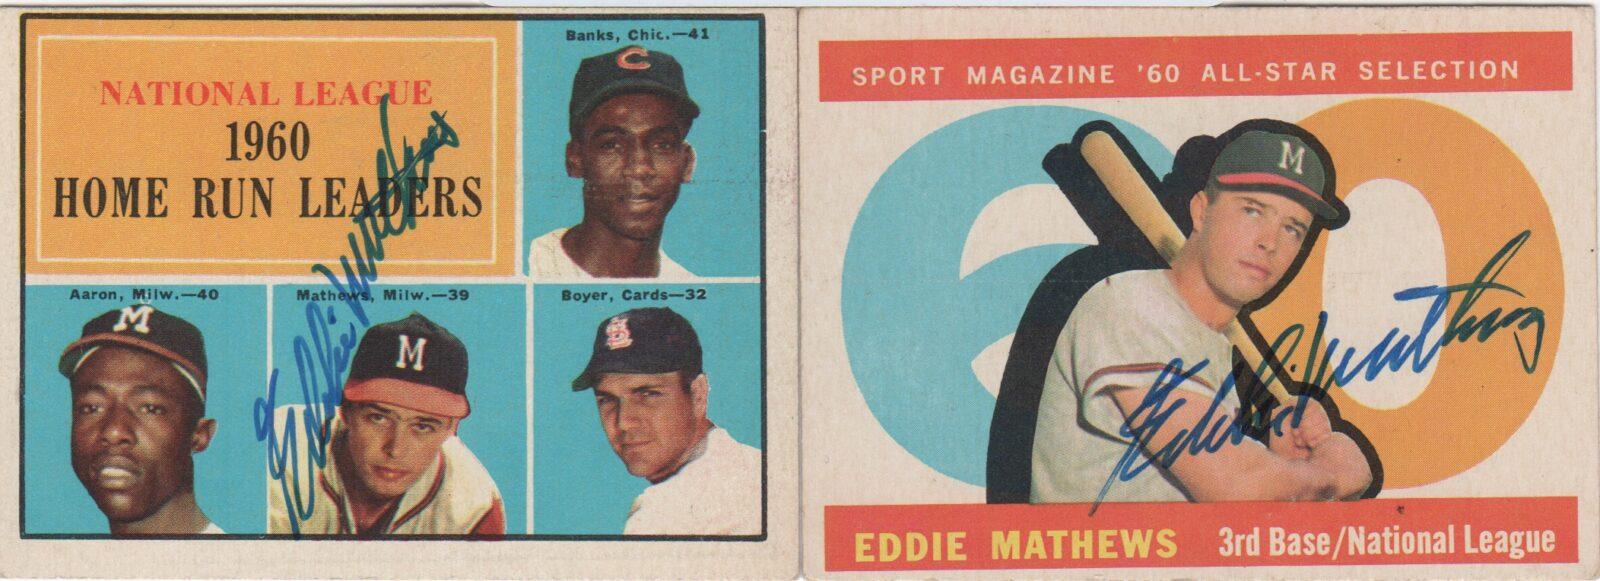 Who do you think was the better overall player, Eddie Mathews or